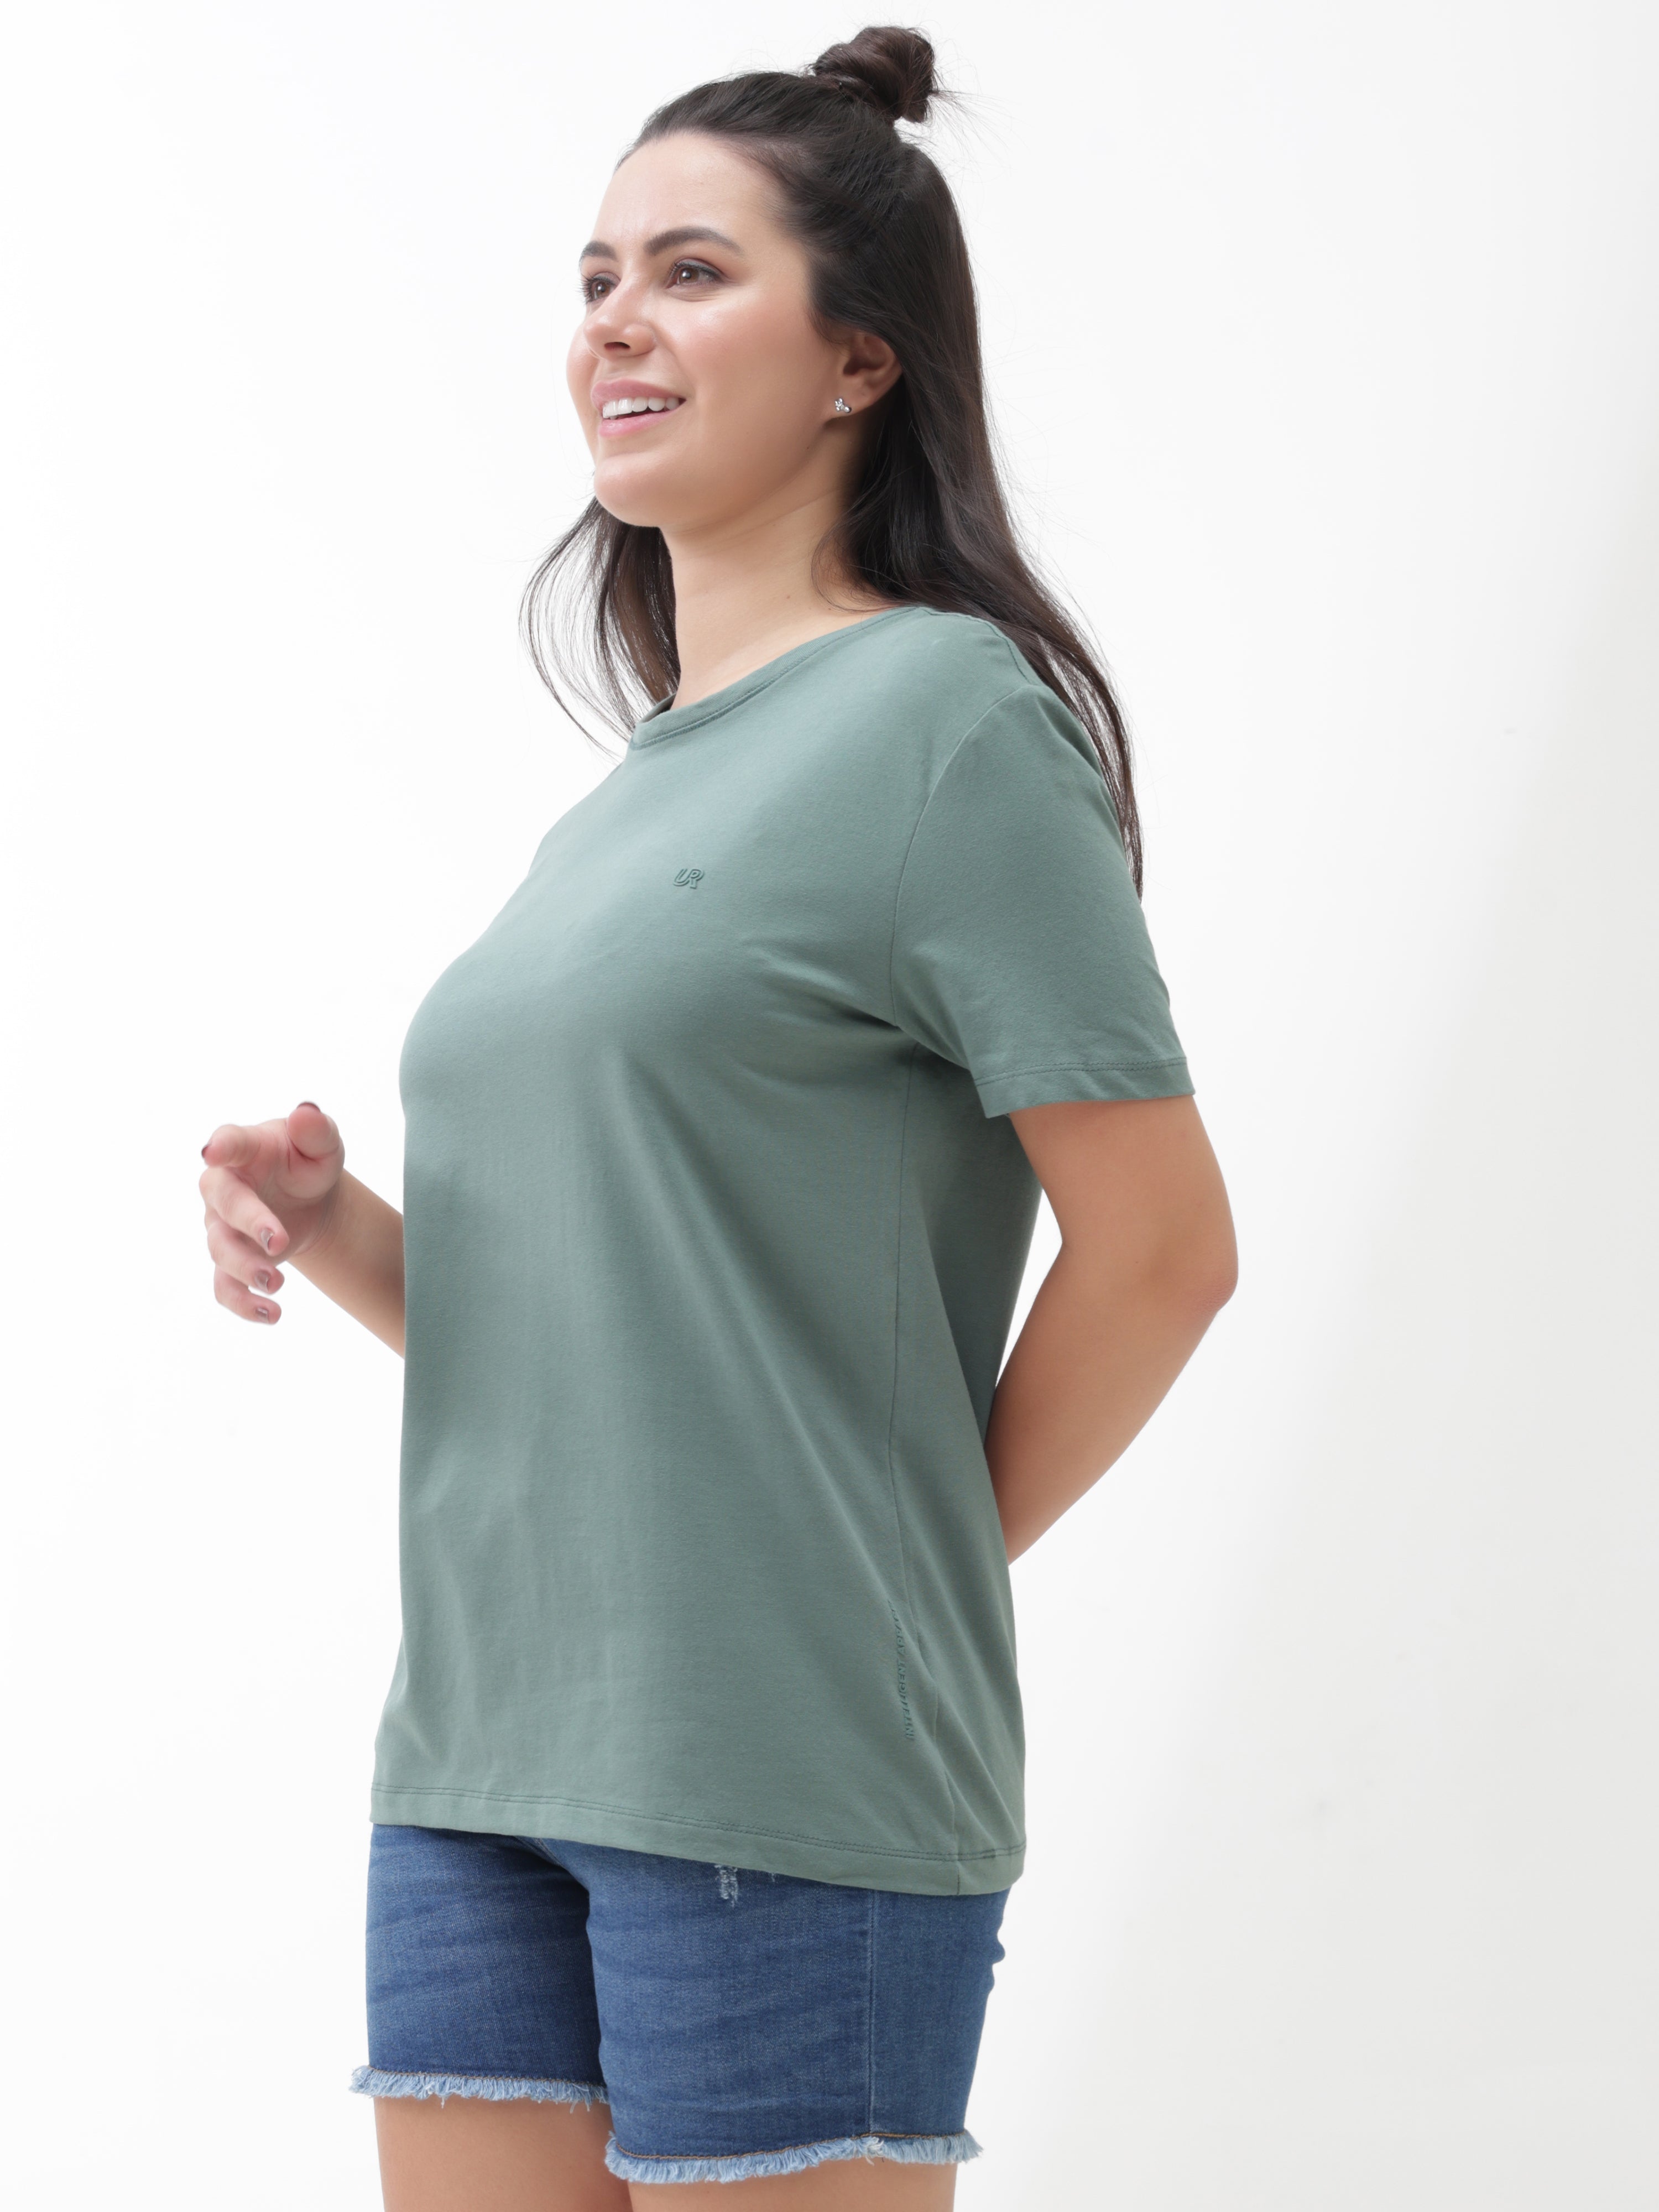 Woman wearing Simple Green Turms T-shirt, round-neck, tailored fit, stain-proof, odor-resistant, stylish shirts for men, premium cotton casual wear